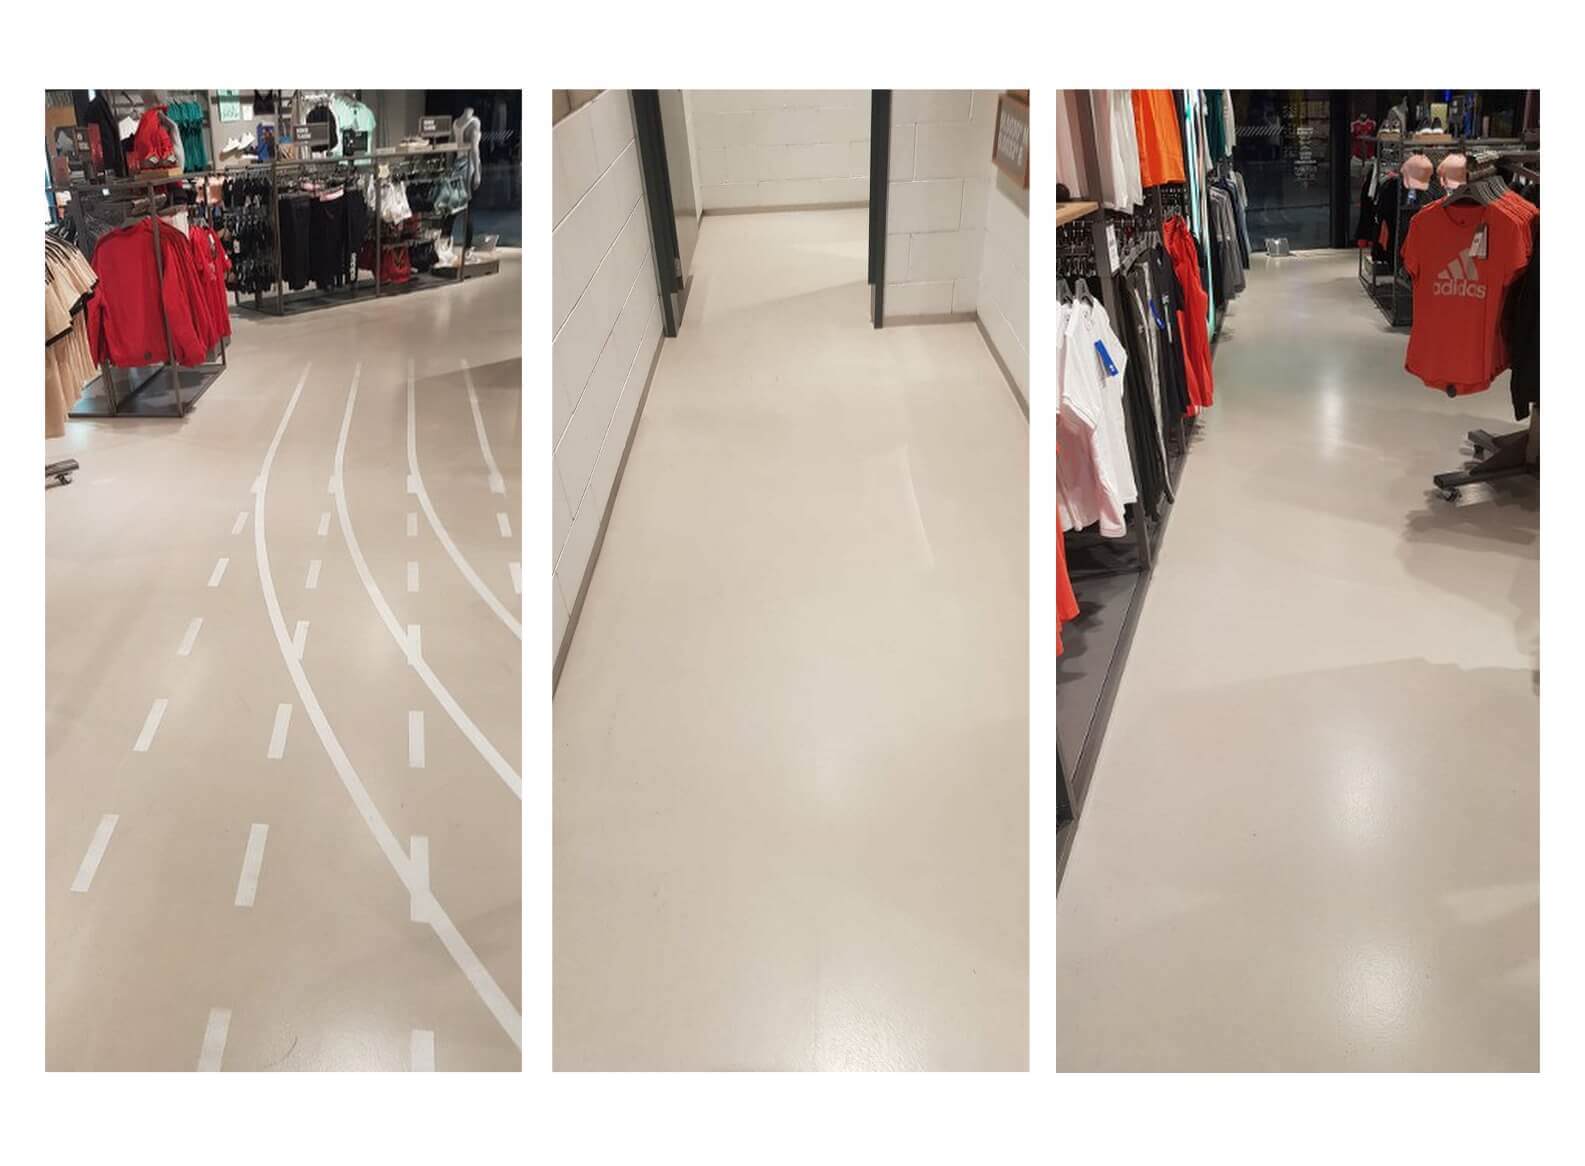 Flooring at Adidas Retail oulet